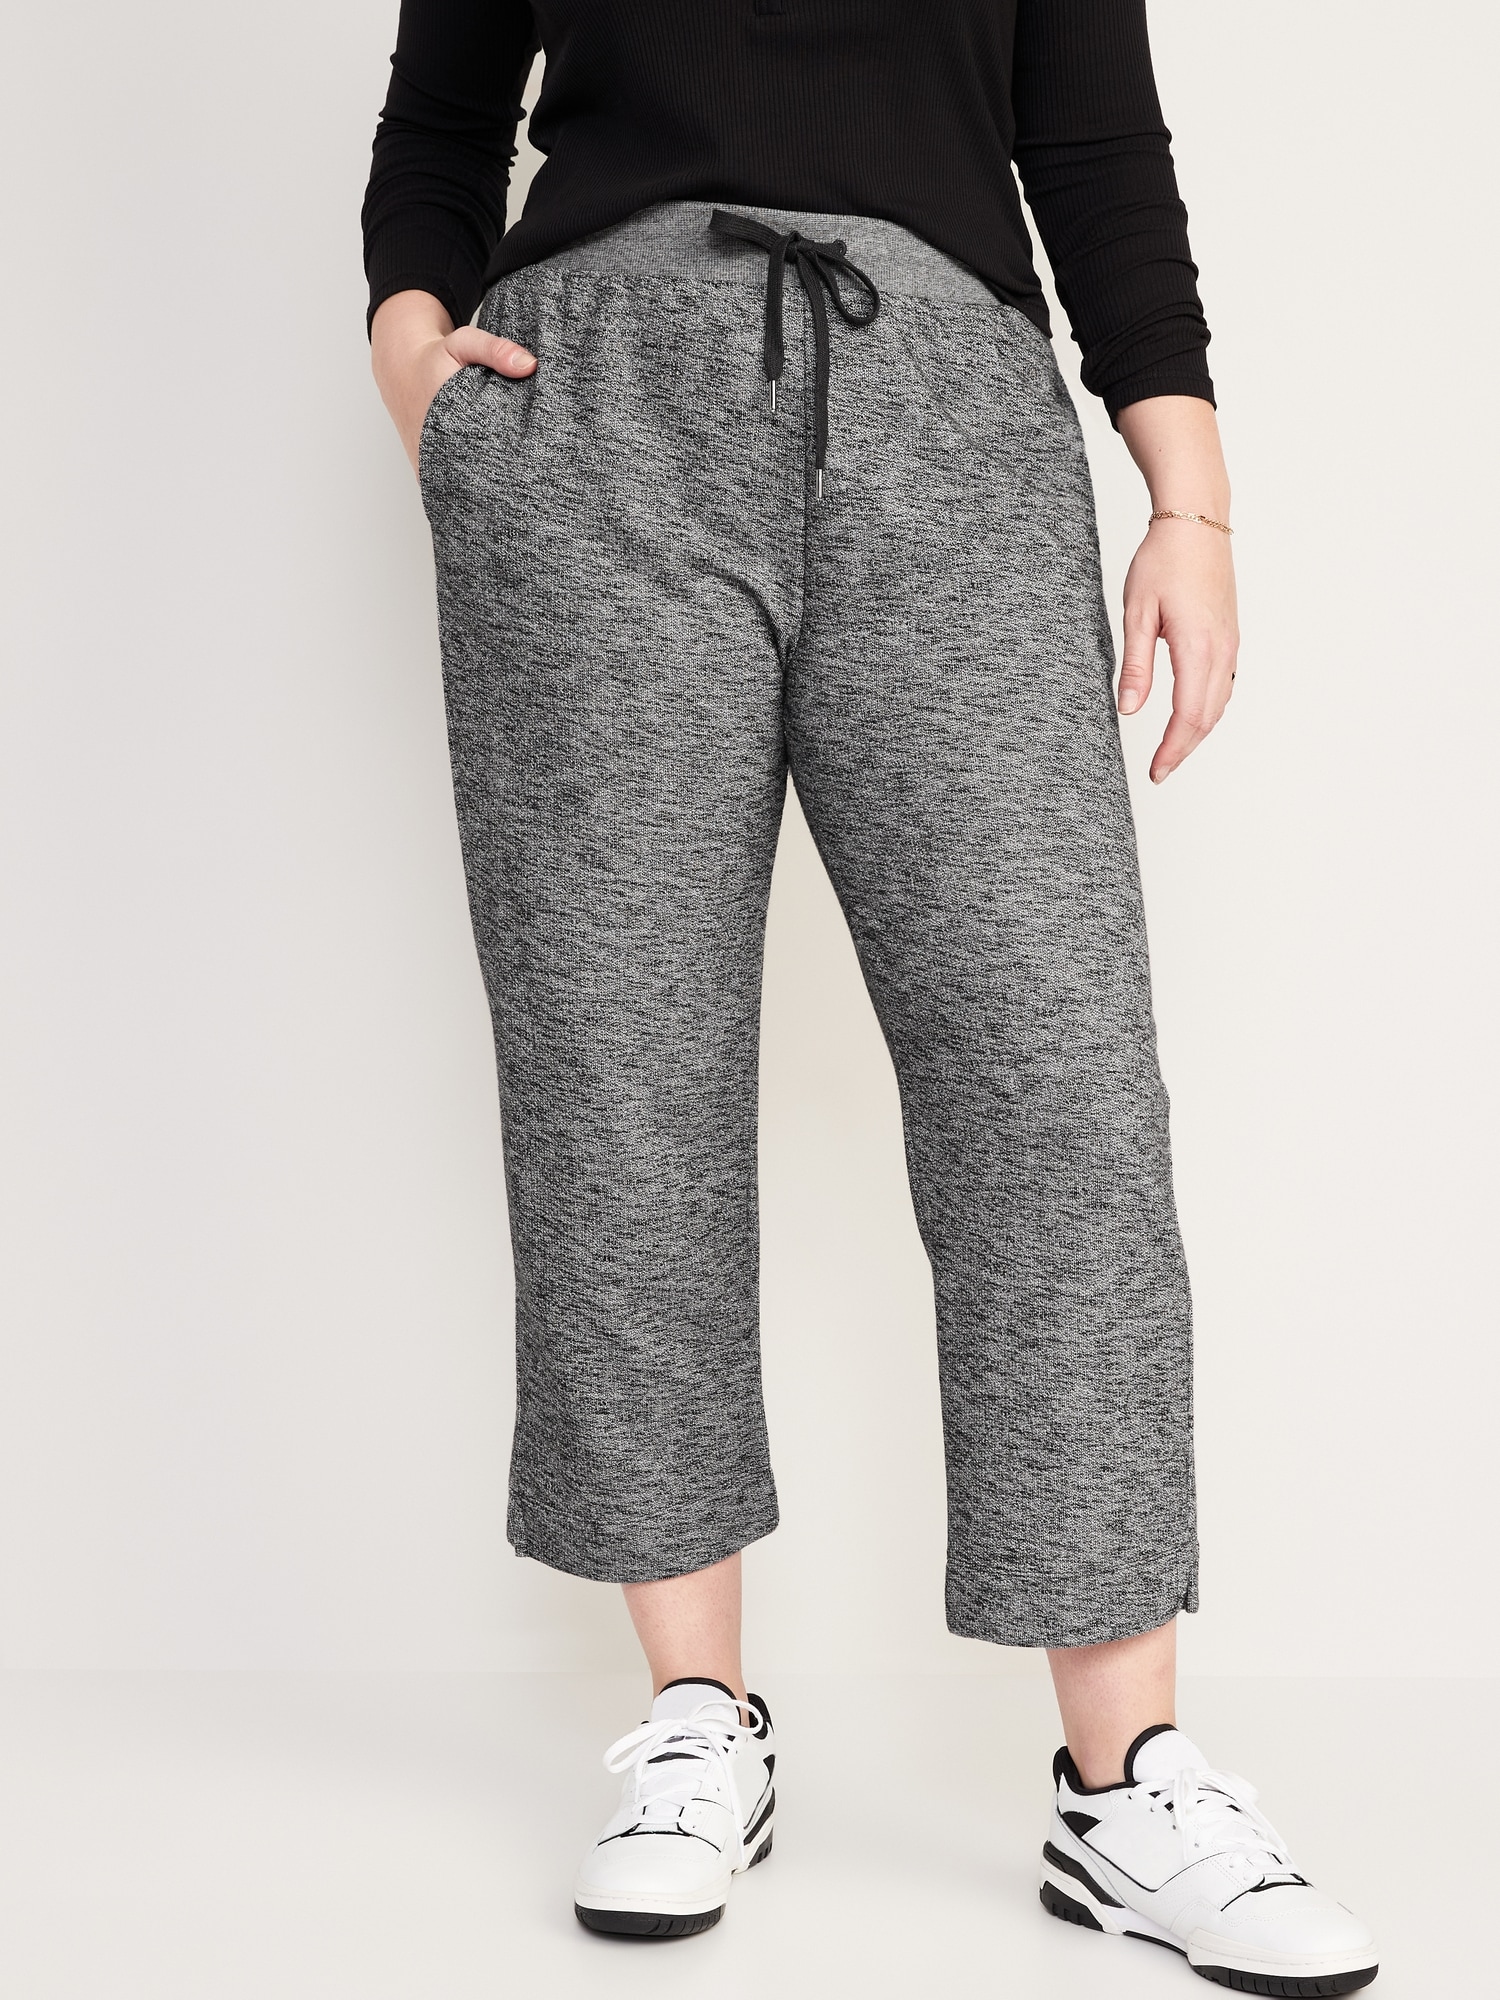 Women's Cropped Track Pants, Old Navy